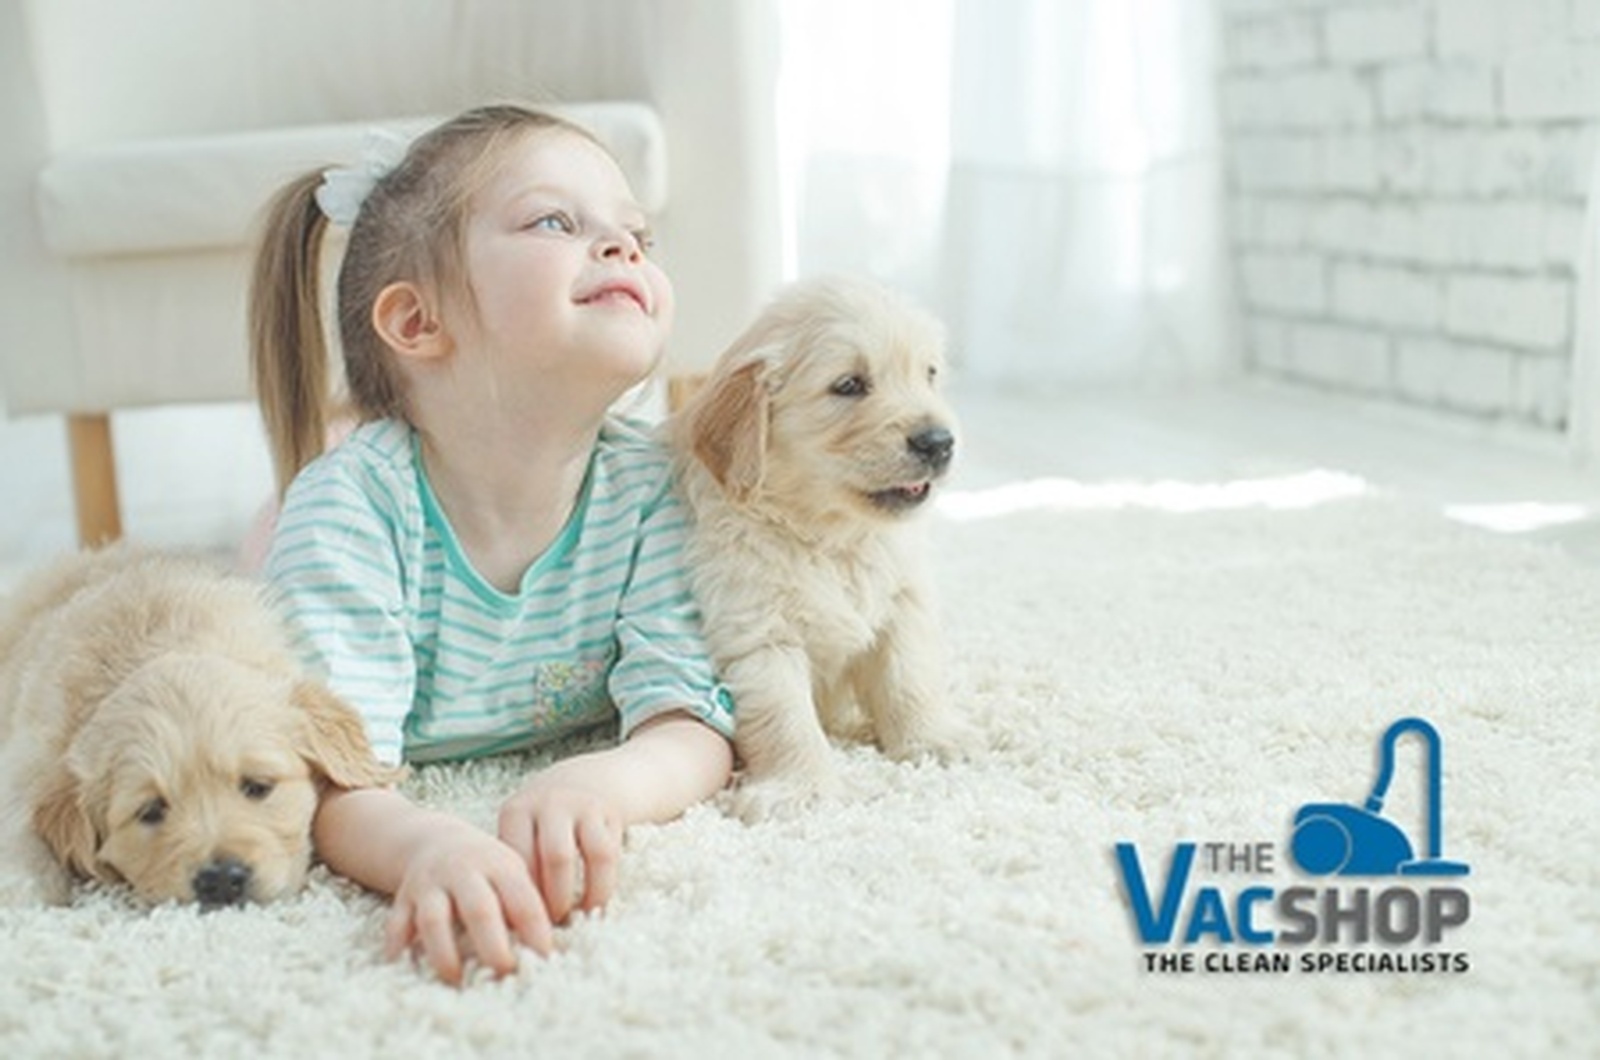 the-vac-shop-home-kids-pets-vacuum-cleaner-supplier-calgary-nw-ne